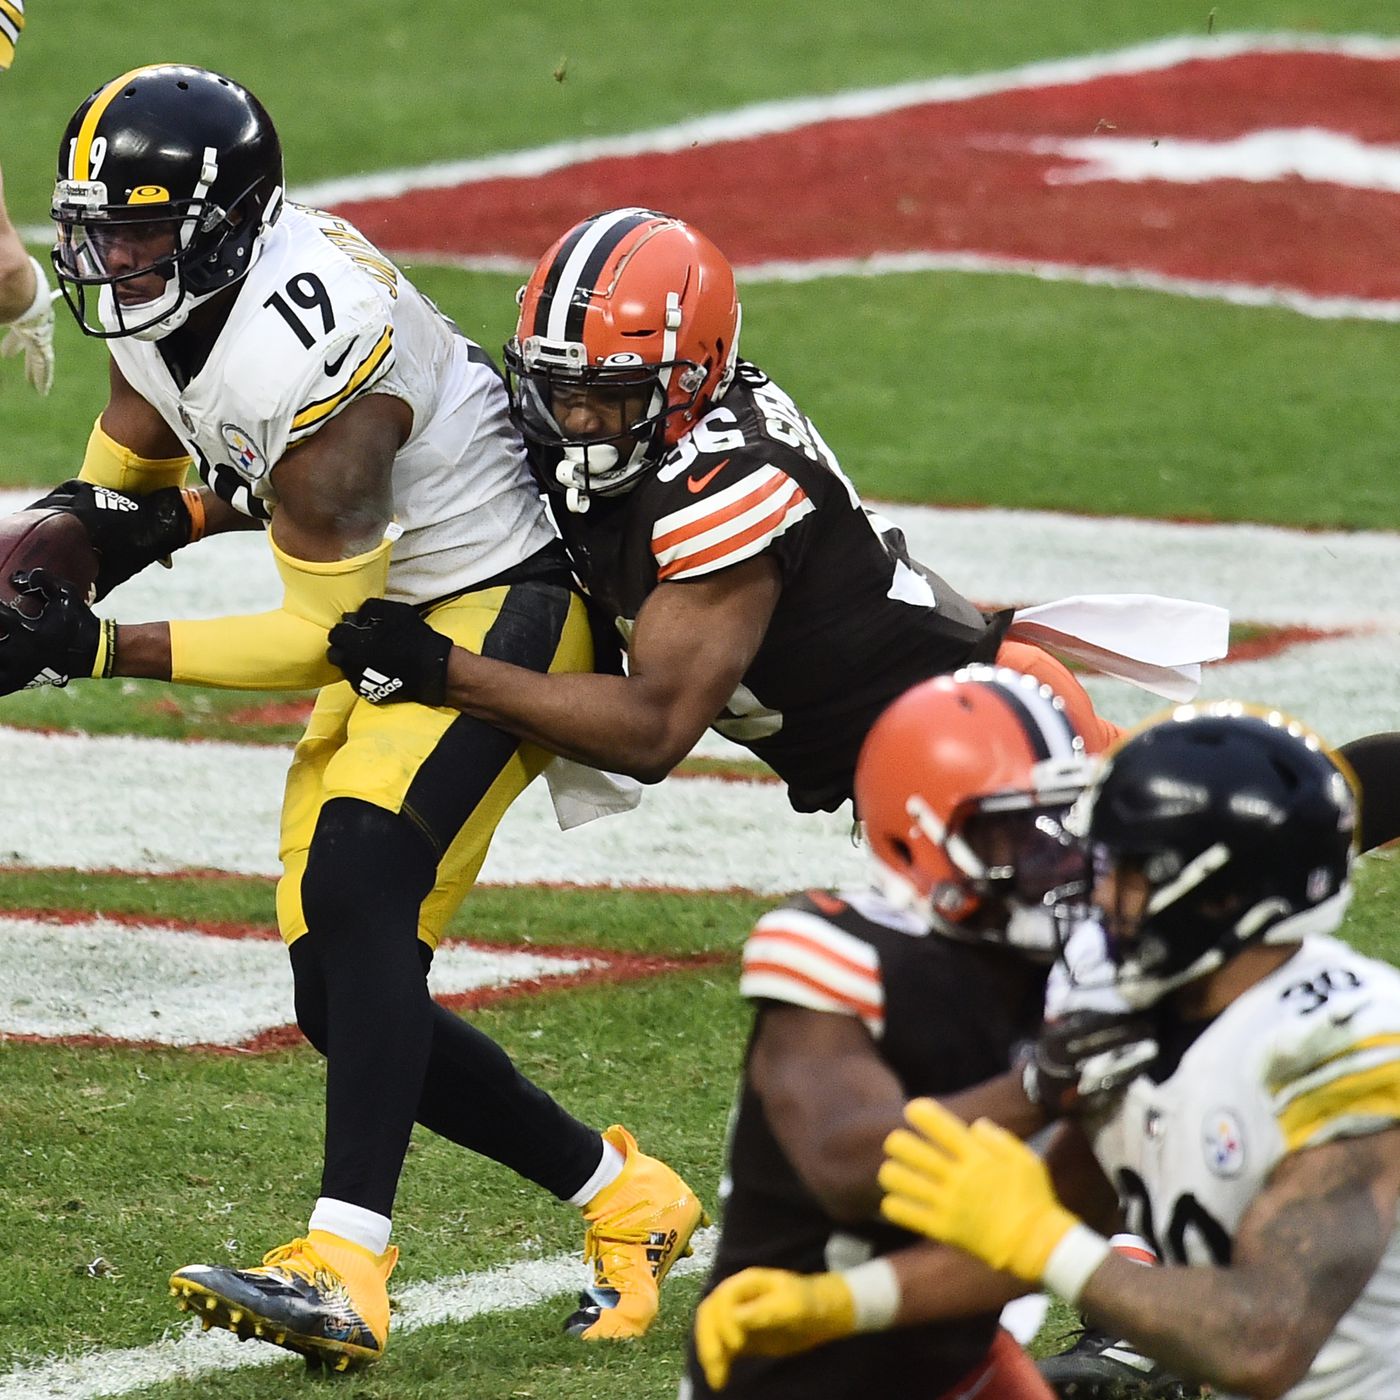 Cleveland Browns vs. Pittsburgh Steelers: How to Watch, Listen and